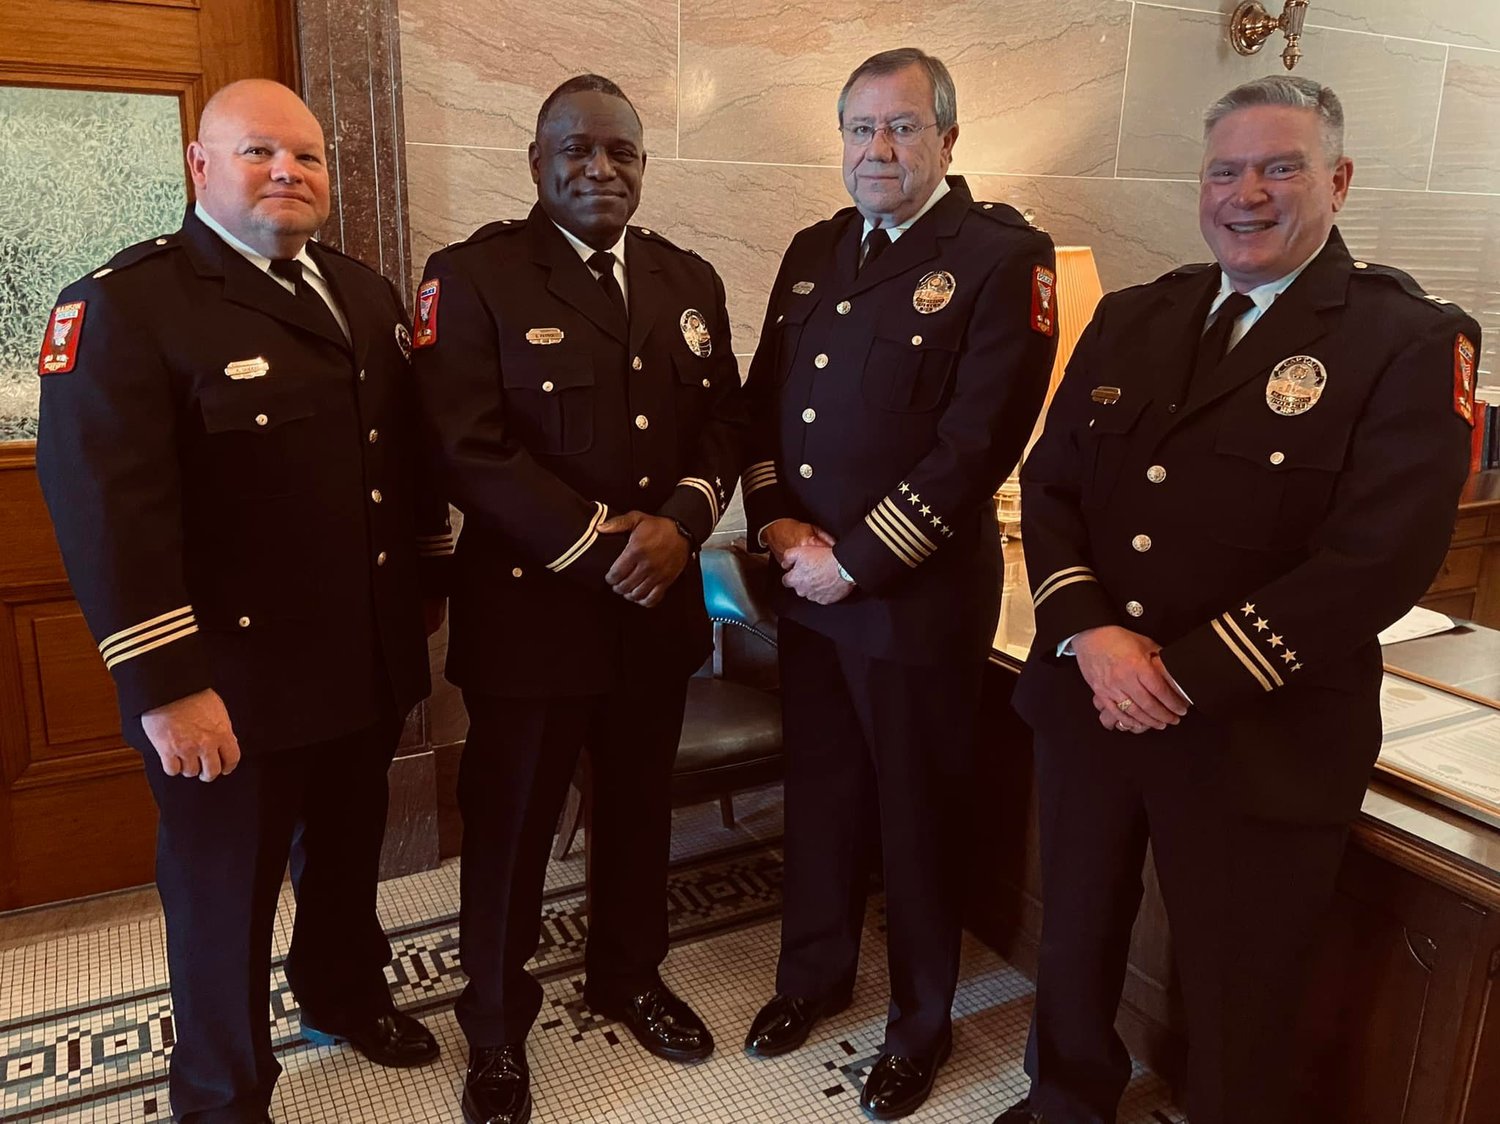 Madison Police Department Command Staff, from left, Assistant Chief Robert Sanders, Captain Stephen Patrick, Chief Gene Waldrop and Captain Kevin Newman.